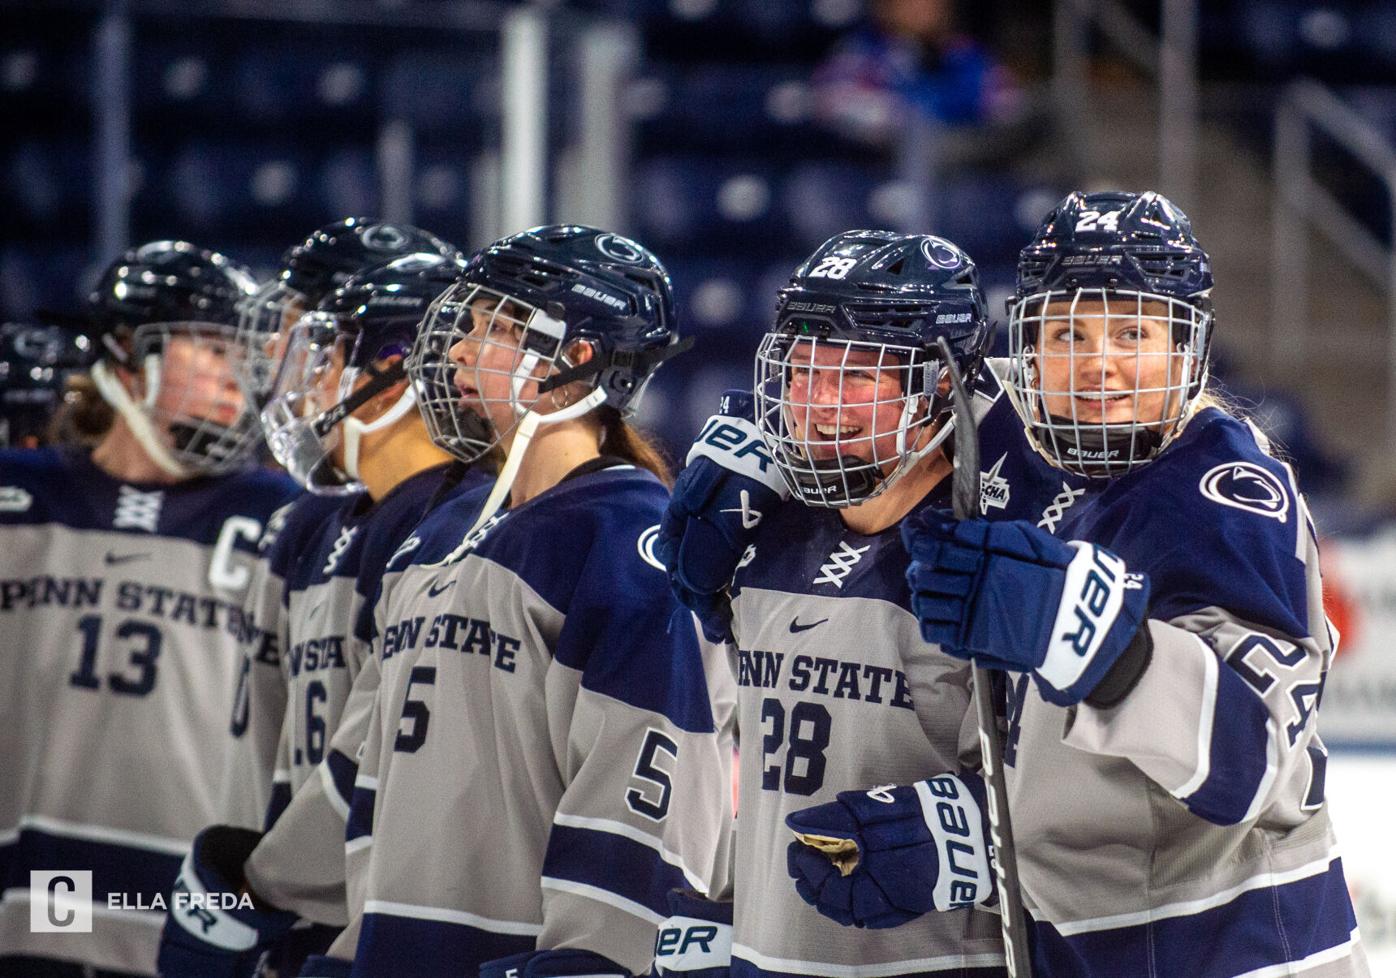 Penn State Men's Hockey Stays Put At No. 6 In Latest USCHO Poll